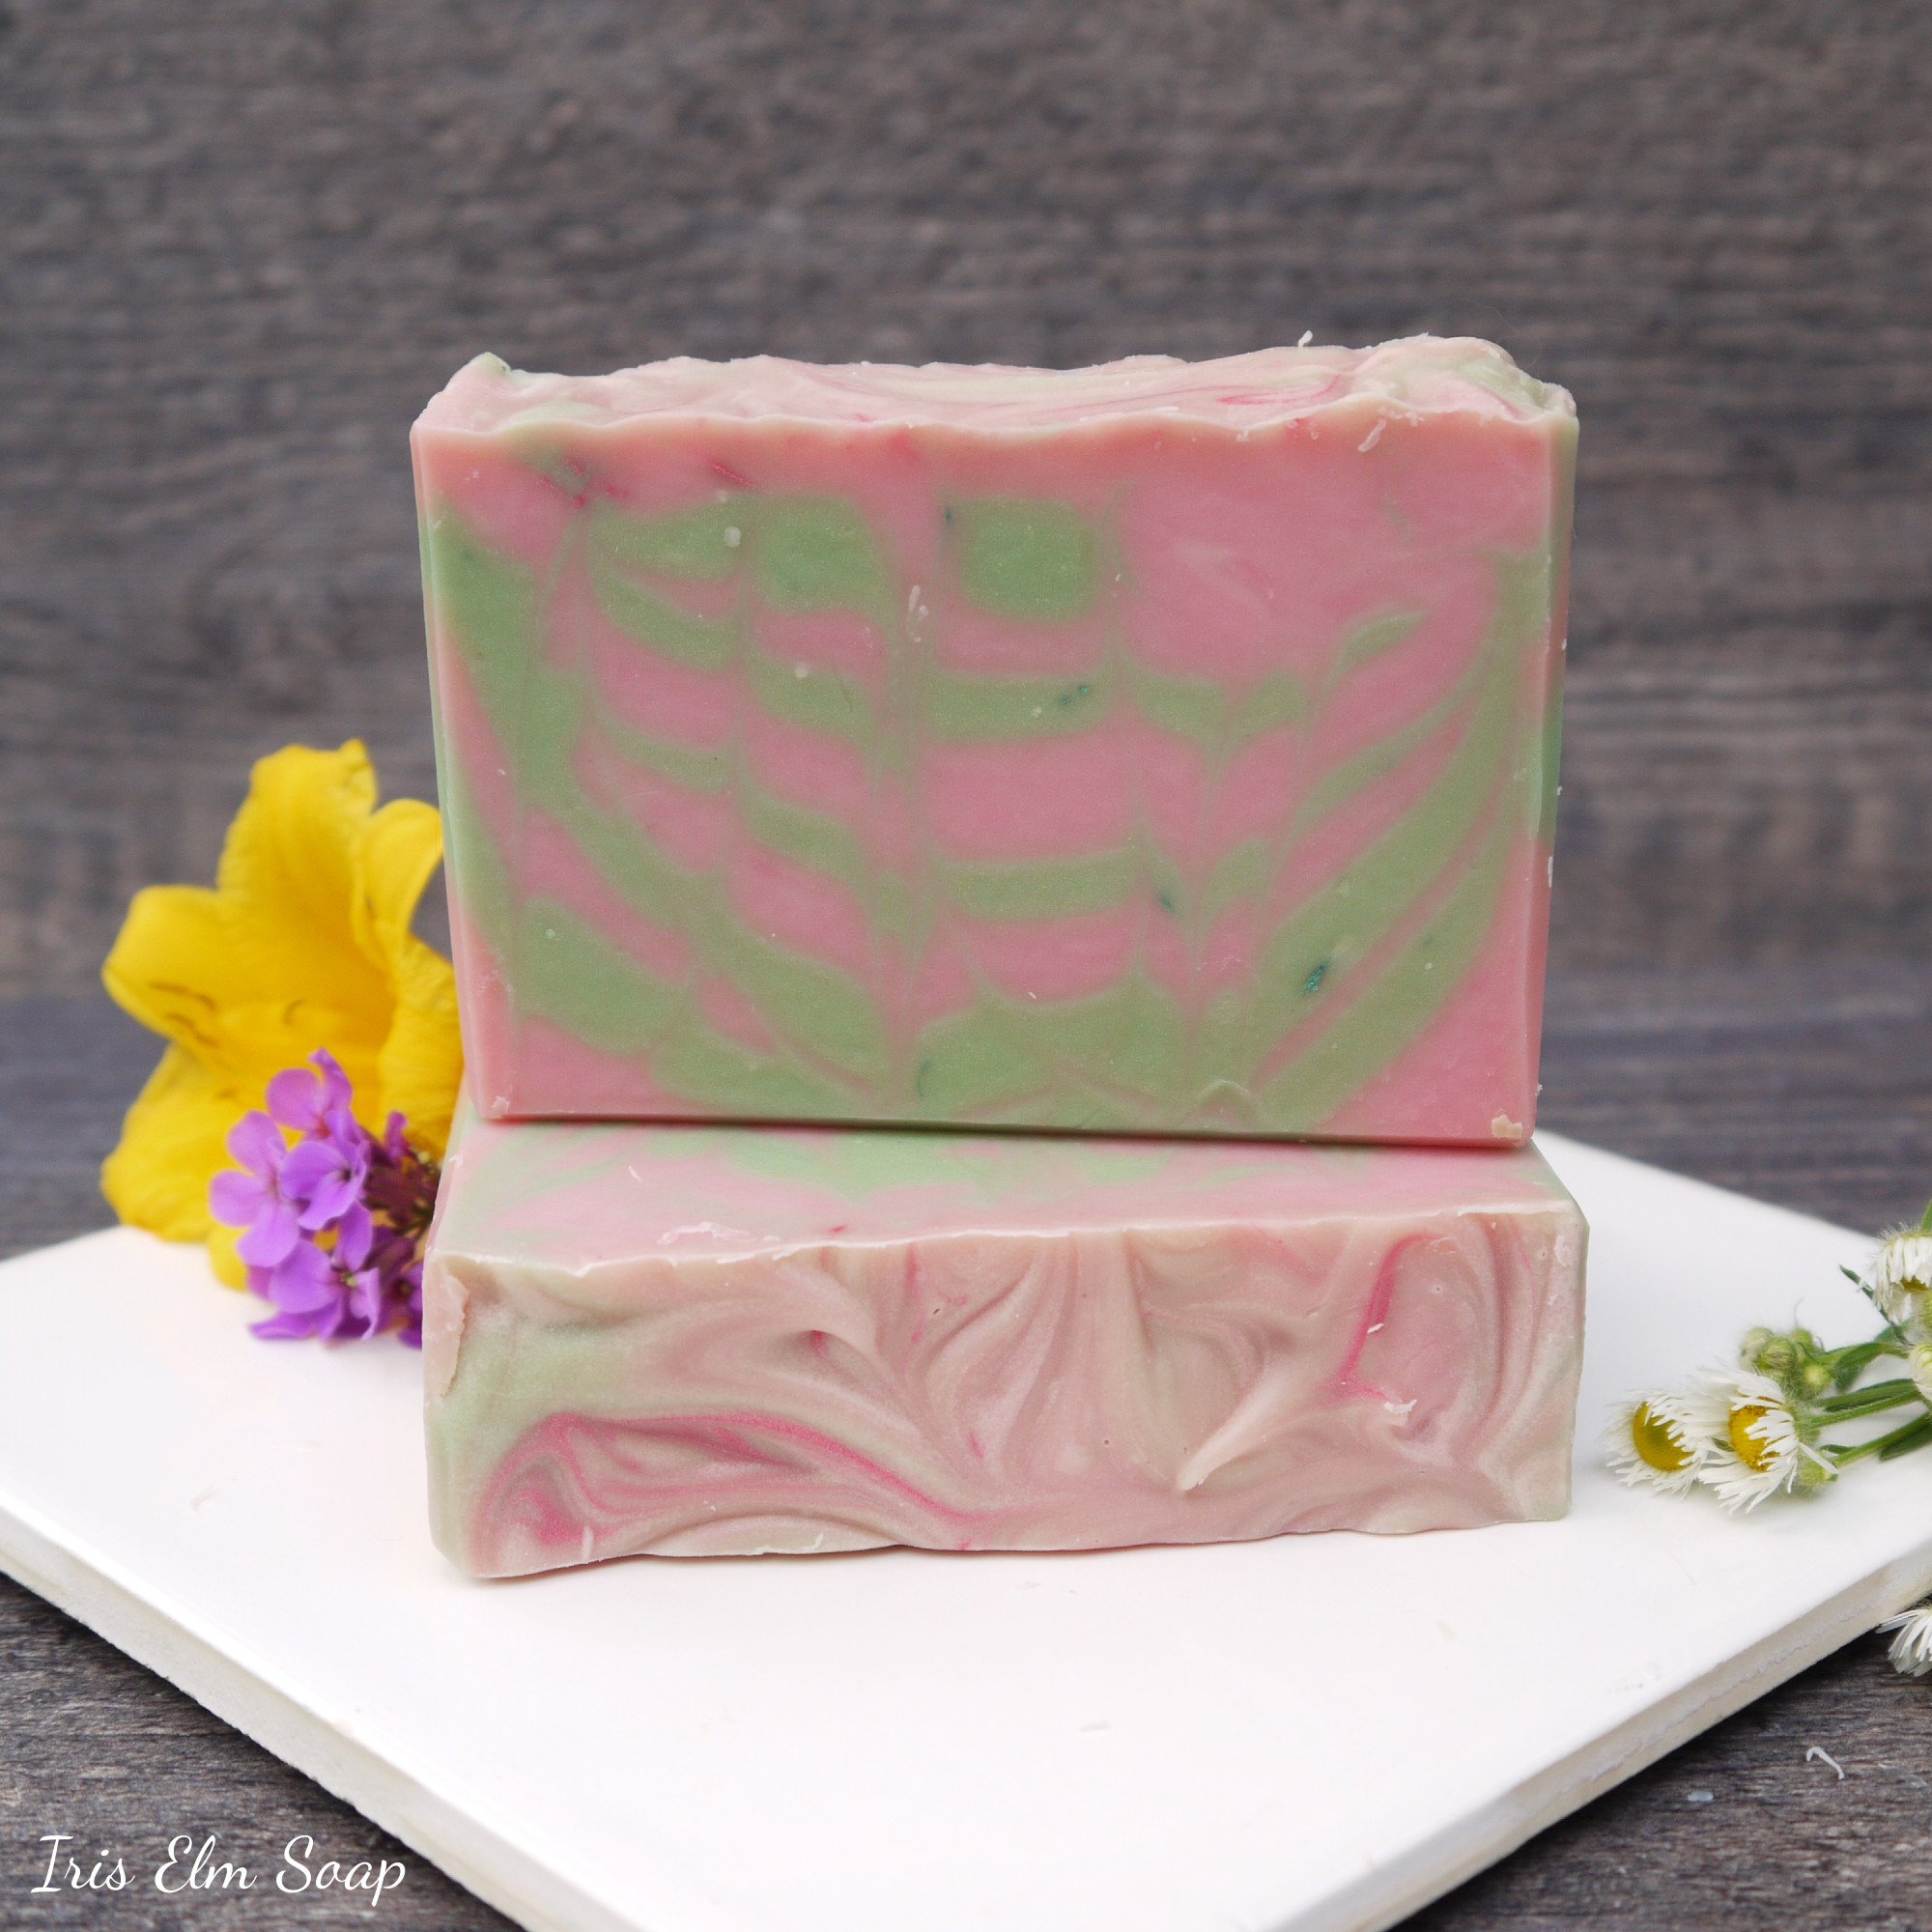 Guavaberry Goji Handmade Cold Process Soap